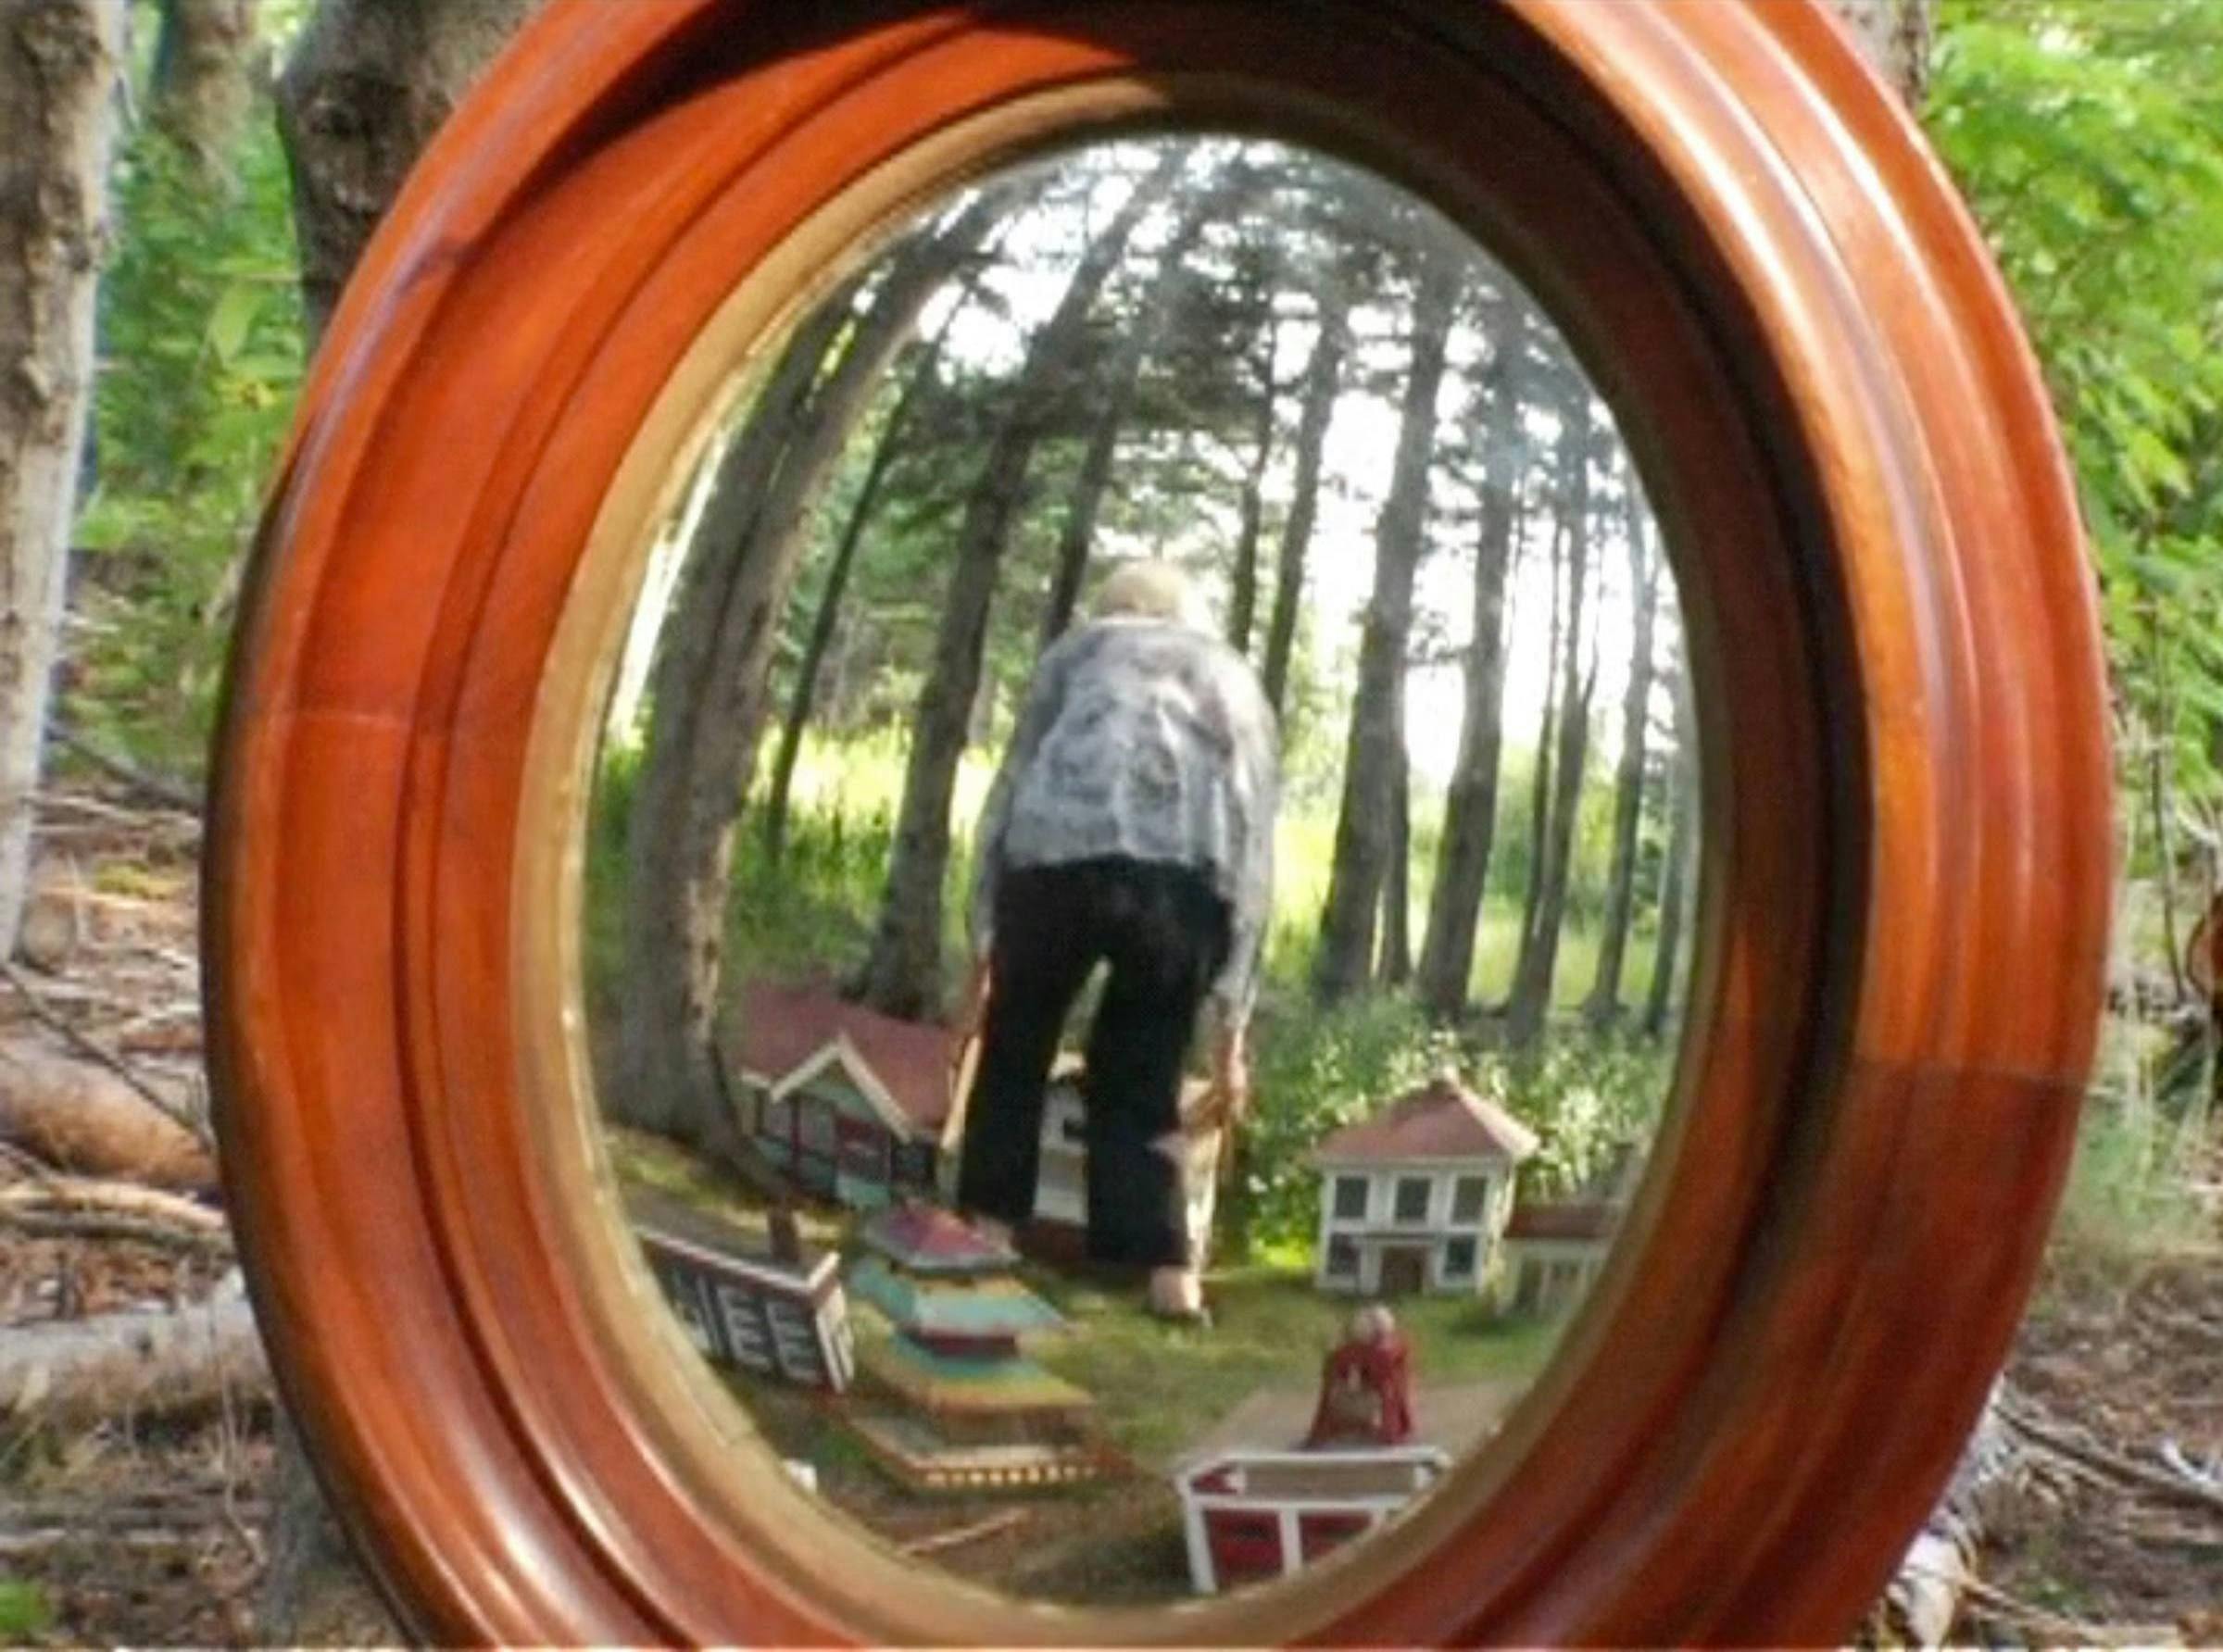 An image of the artist in a garden. She is peering through a wooden window at us. There are small wooden houses (doll size) in the garden